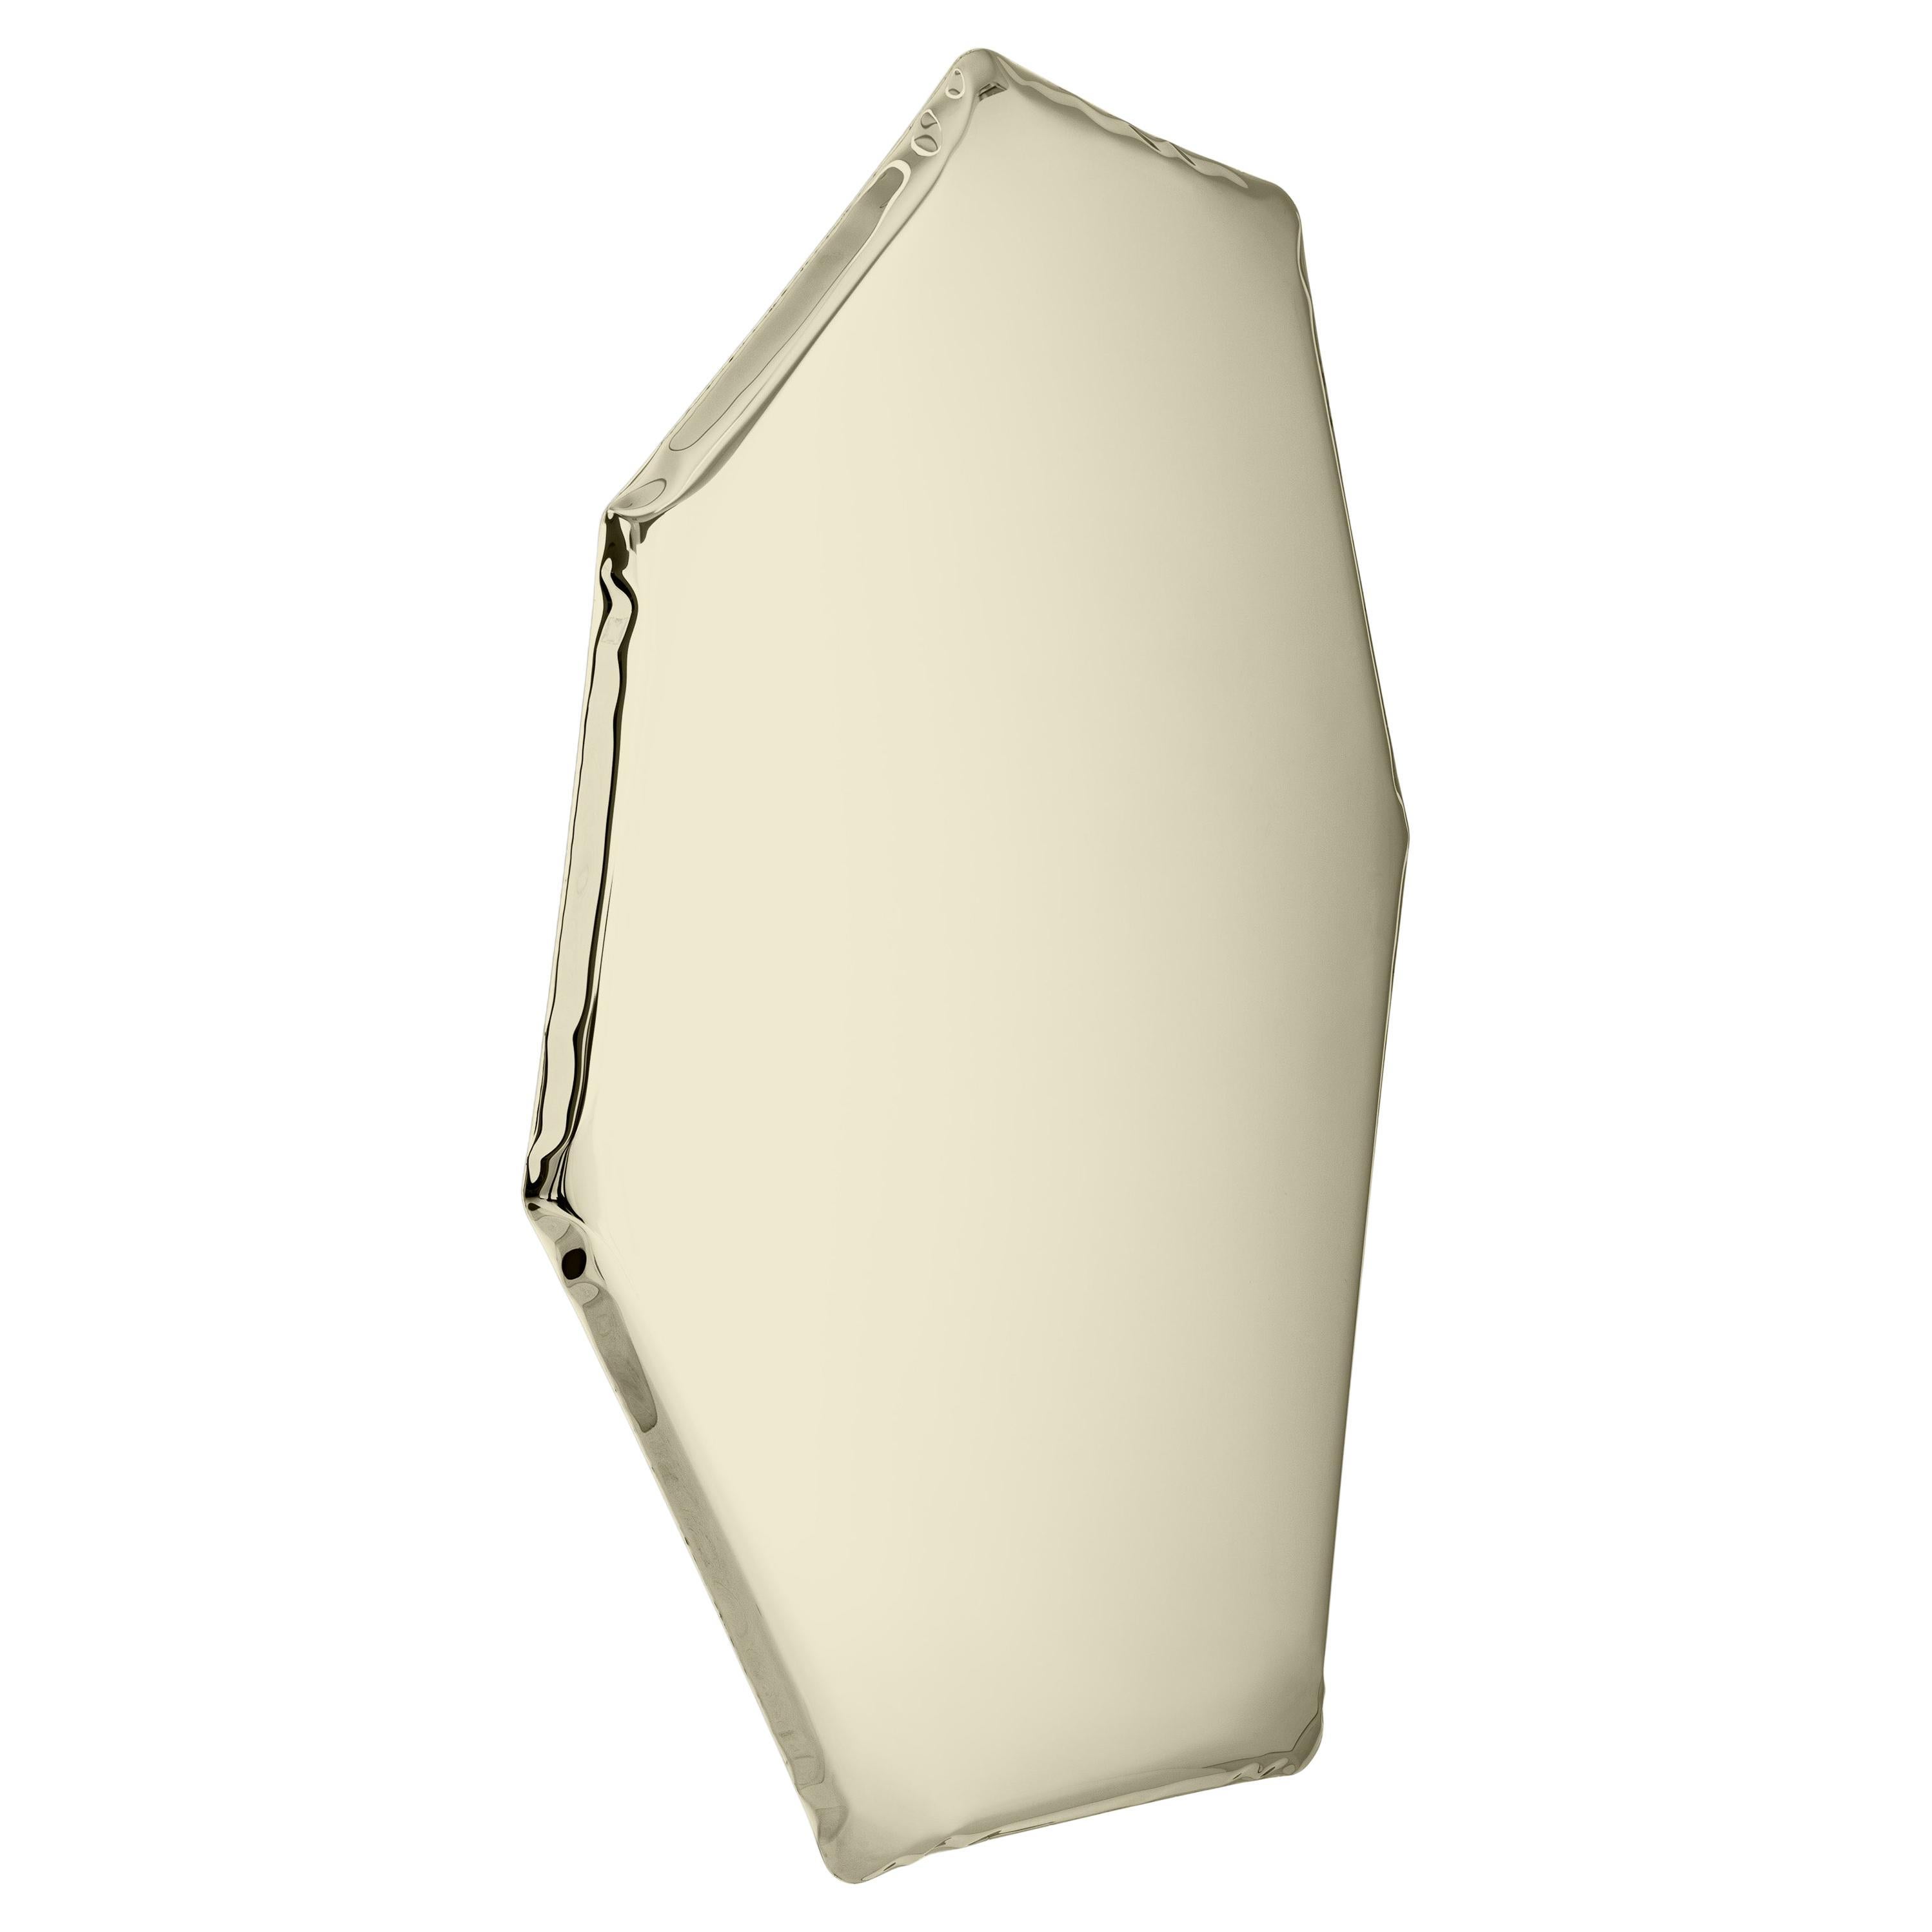 Tafla C2 Polished Stainless Steel Light Gold Color Wall Mirror by Zieta